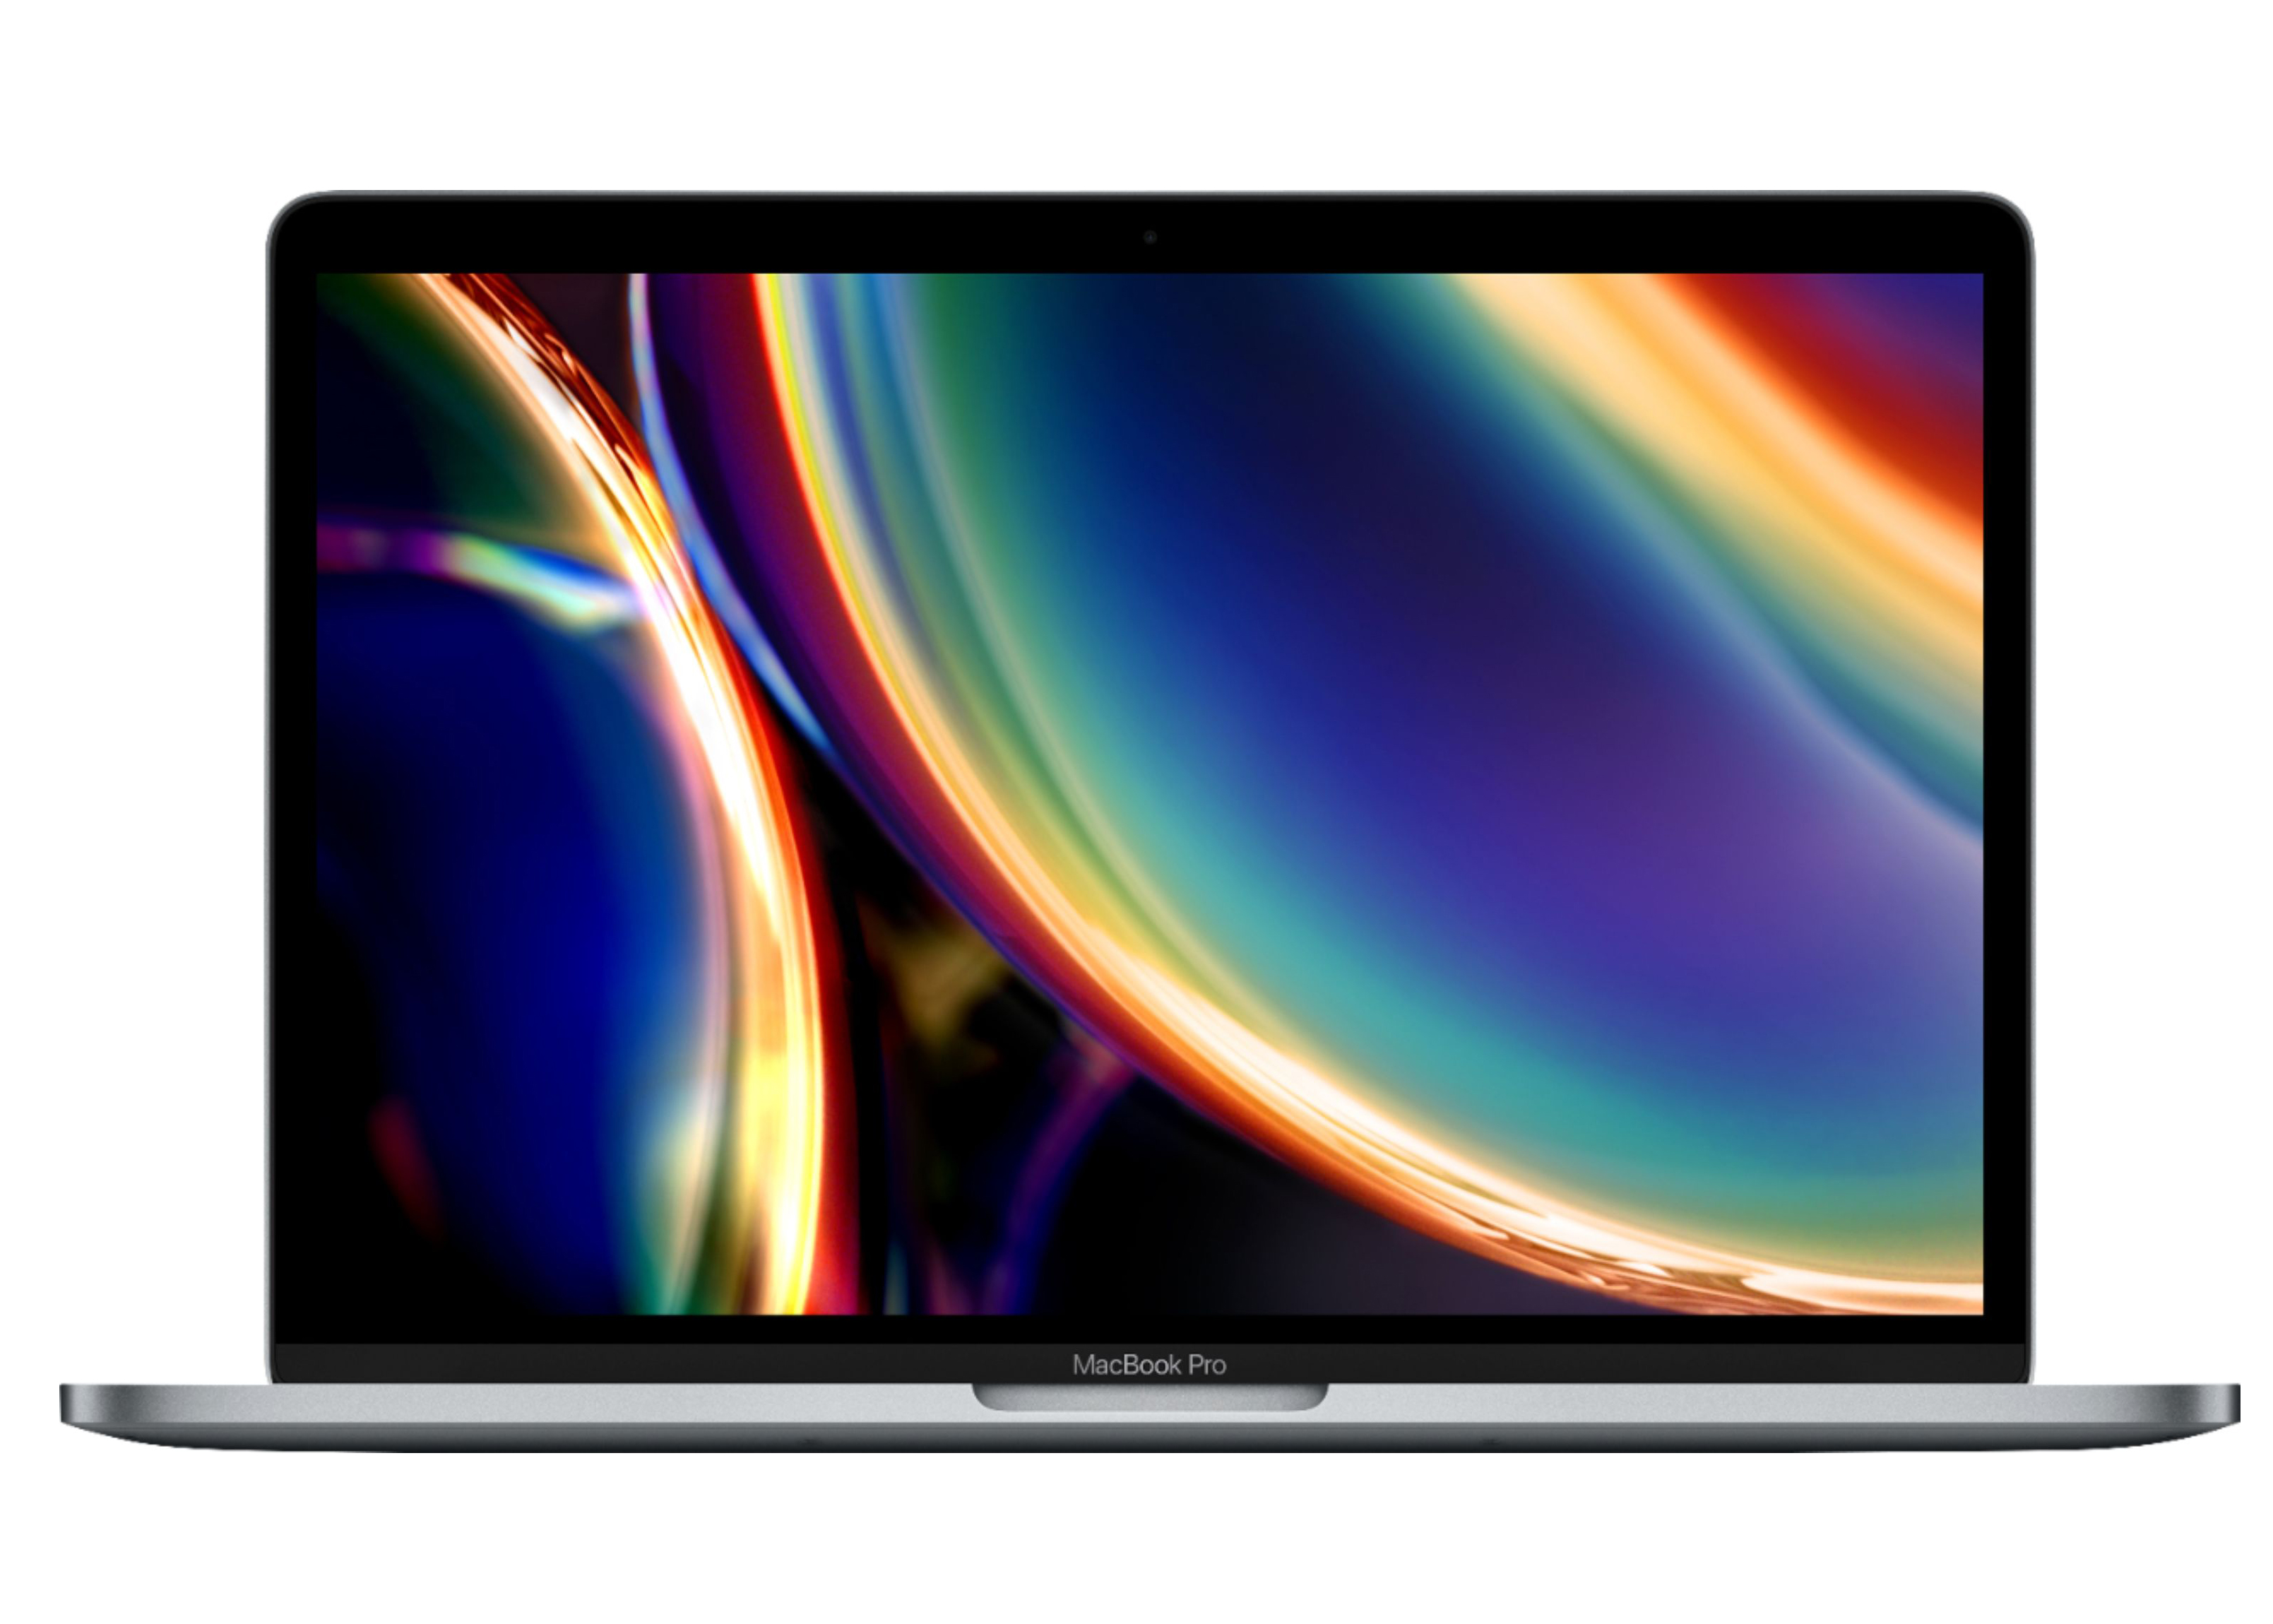 Apple MacBook Pro 13-inch with Touch Bar (8th Gen Intel Core i5 